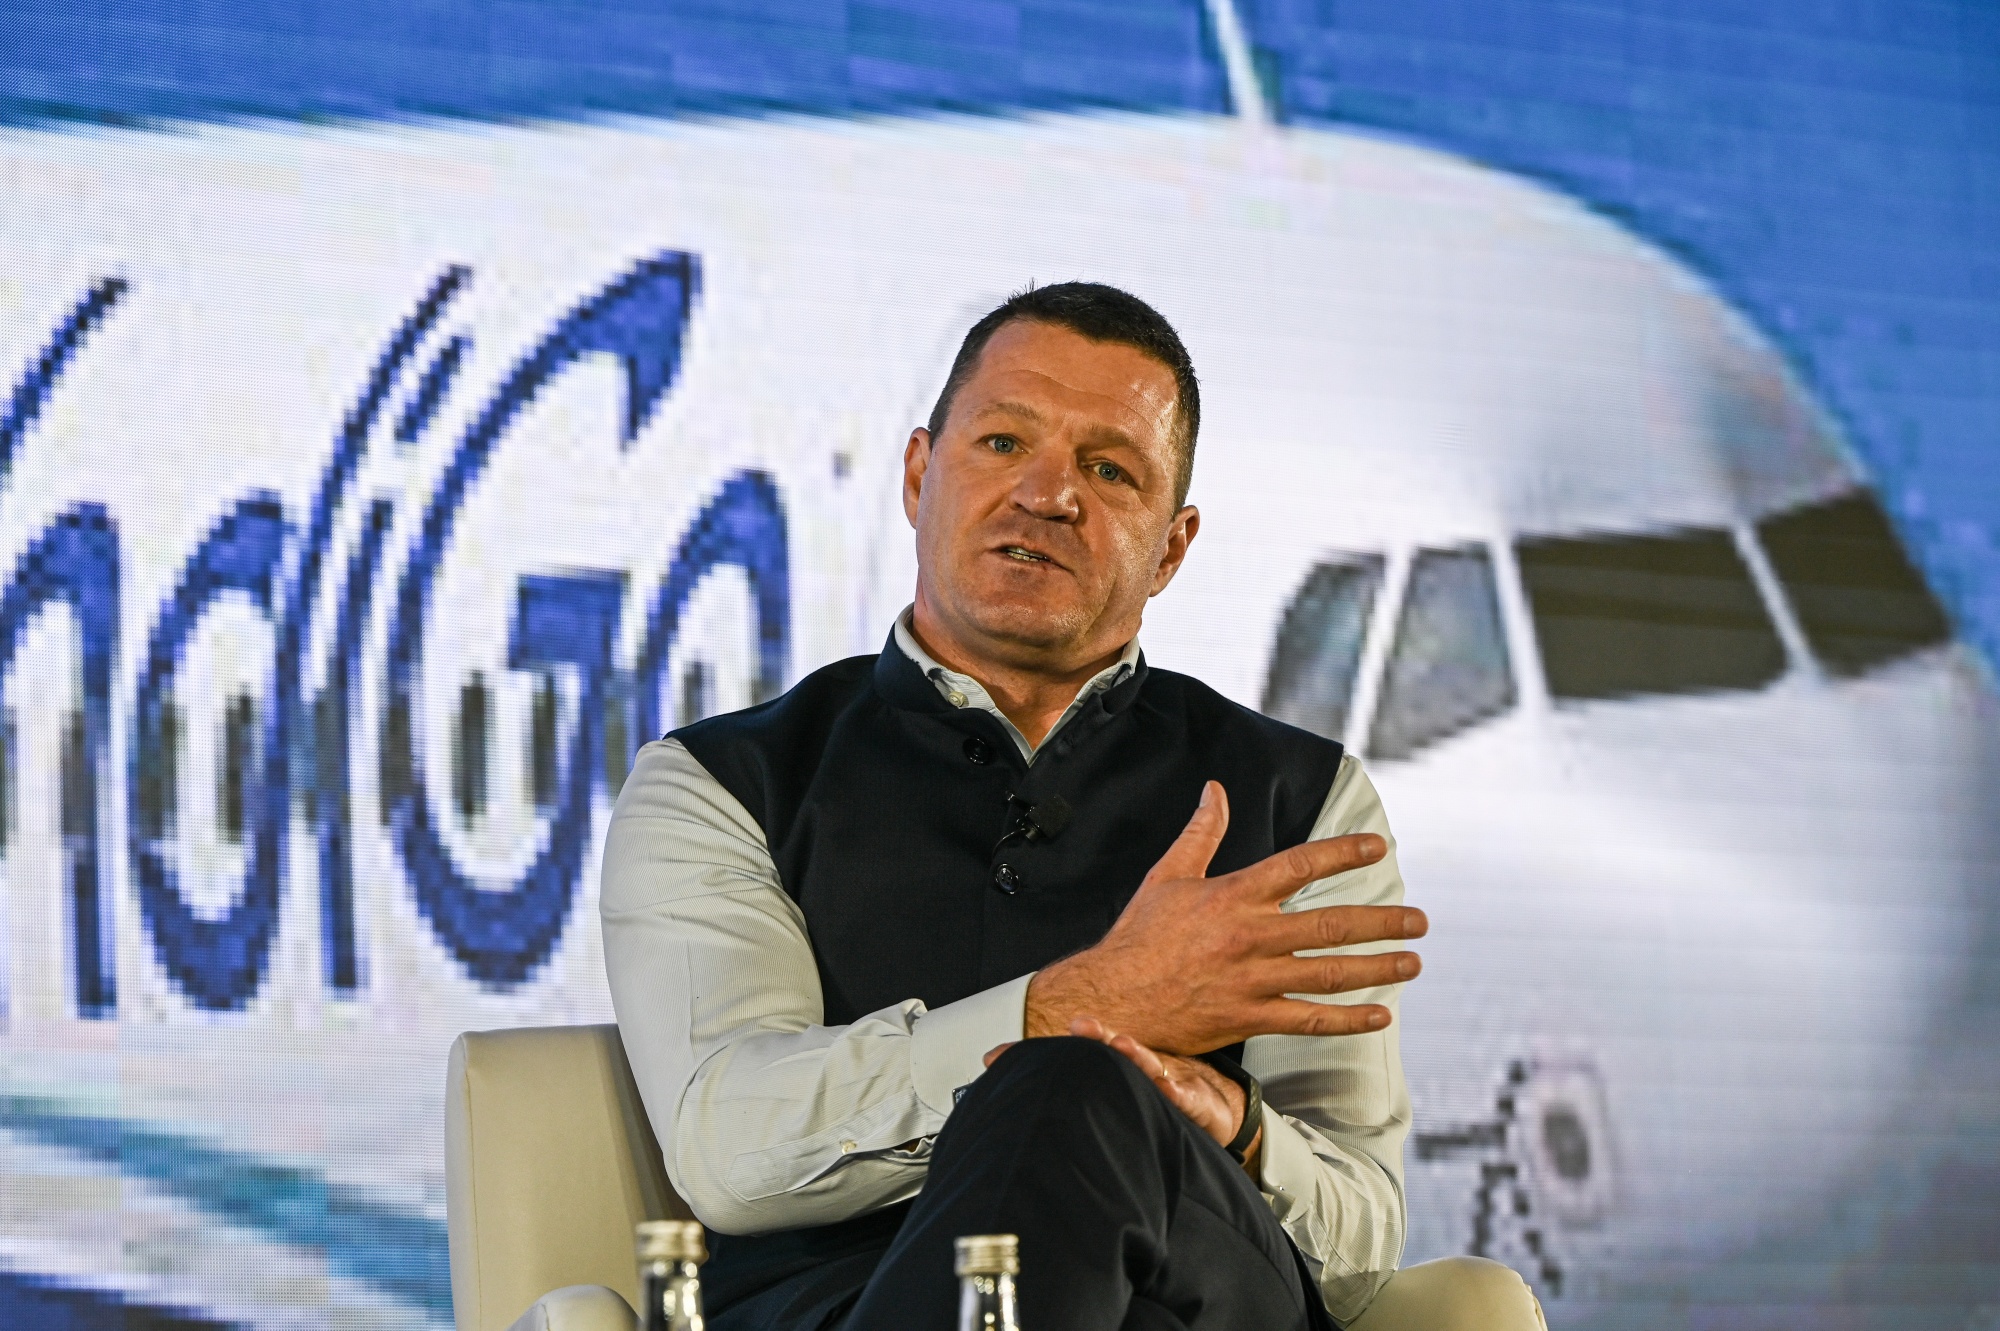 IndiGo Airline Has Enough Planes to Fuel Growth This Decade, CEO Says -  Bloomberg